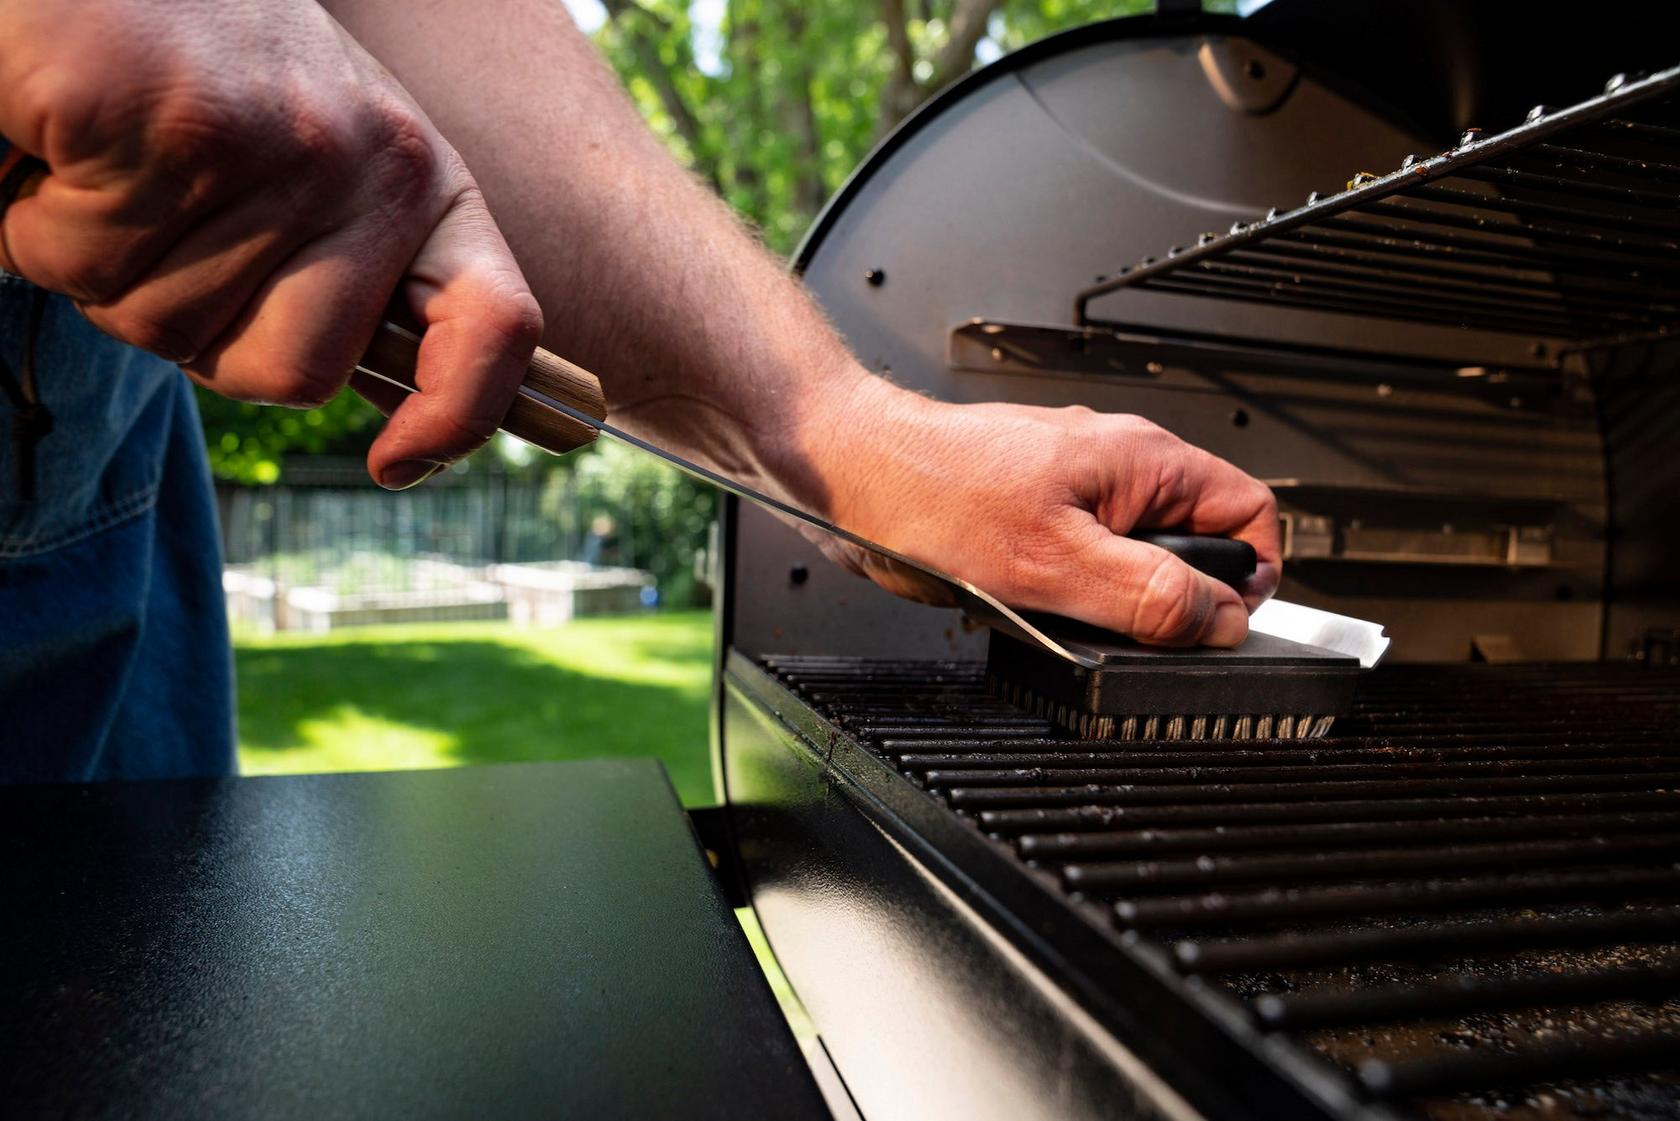 How To Prevent Rust On Grill Grates